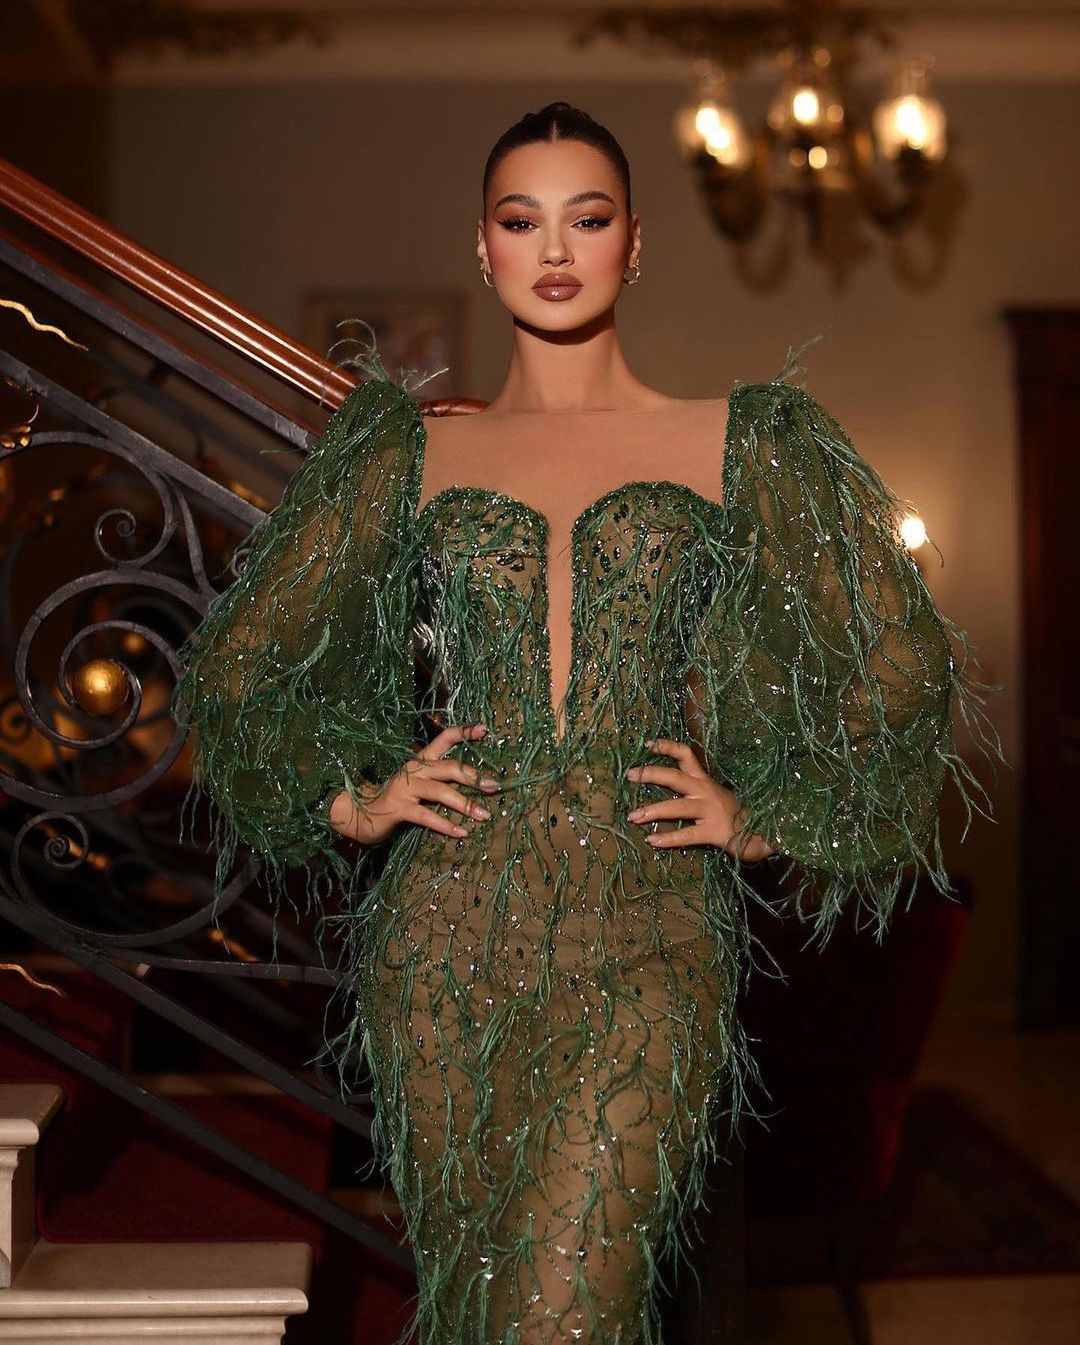 Green Mermaid Prom Dresses Long Sleeves V Neck Appliques Sparkly Sequins 3D Lace Hollow Beaded Floor Length Feather Formal Evening Dresses Plus Size Custom Made